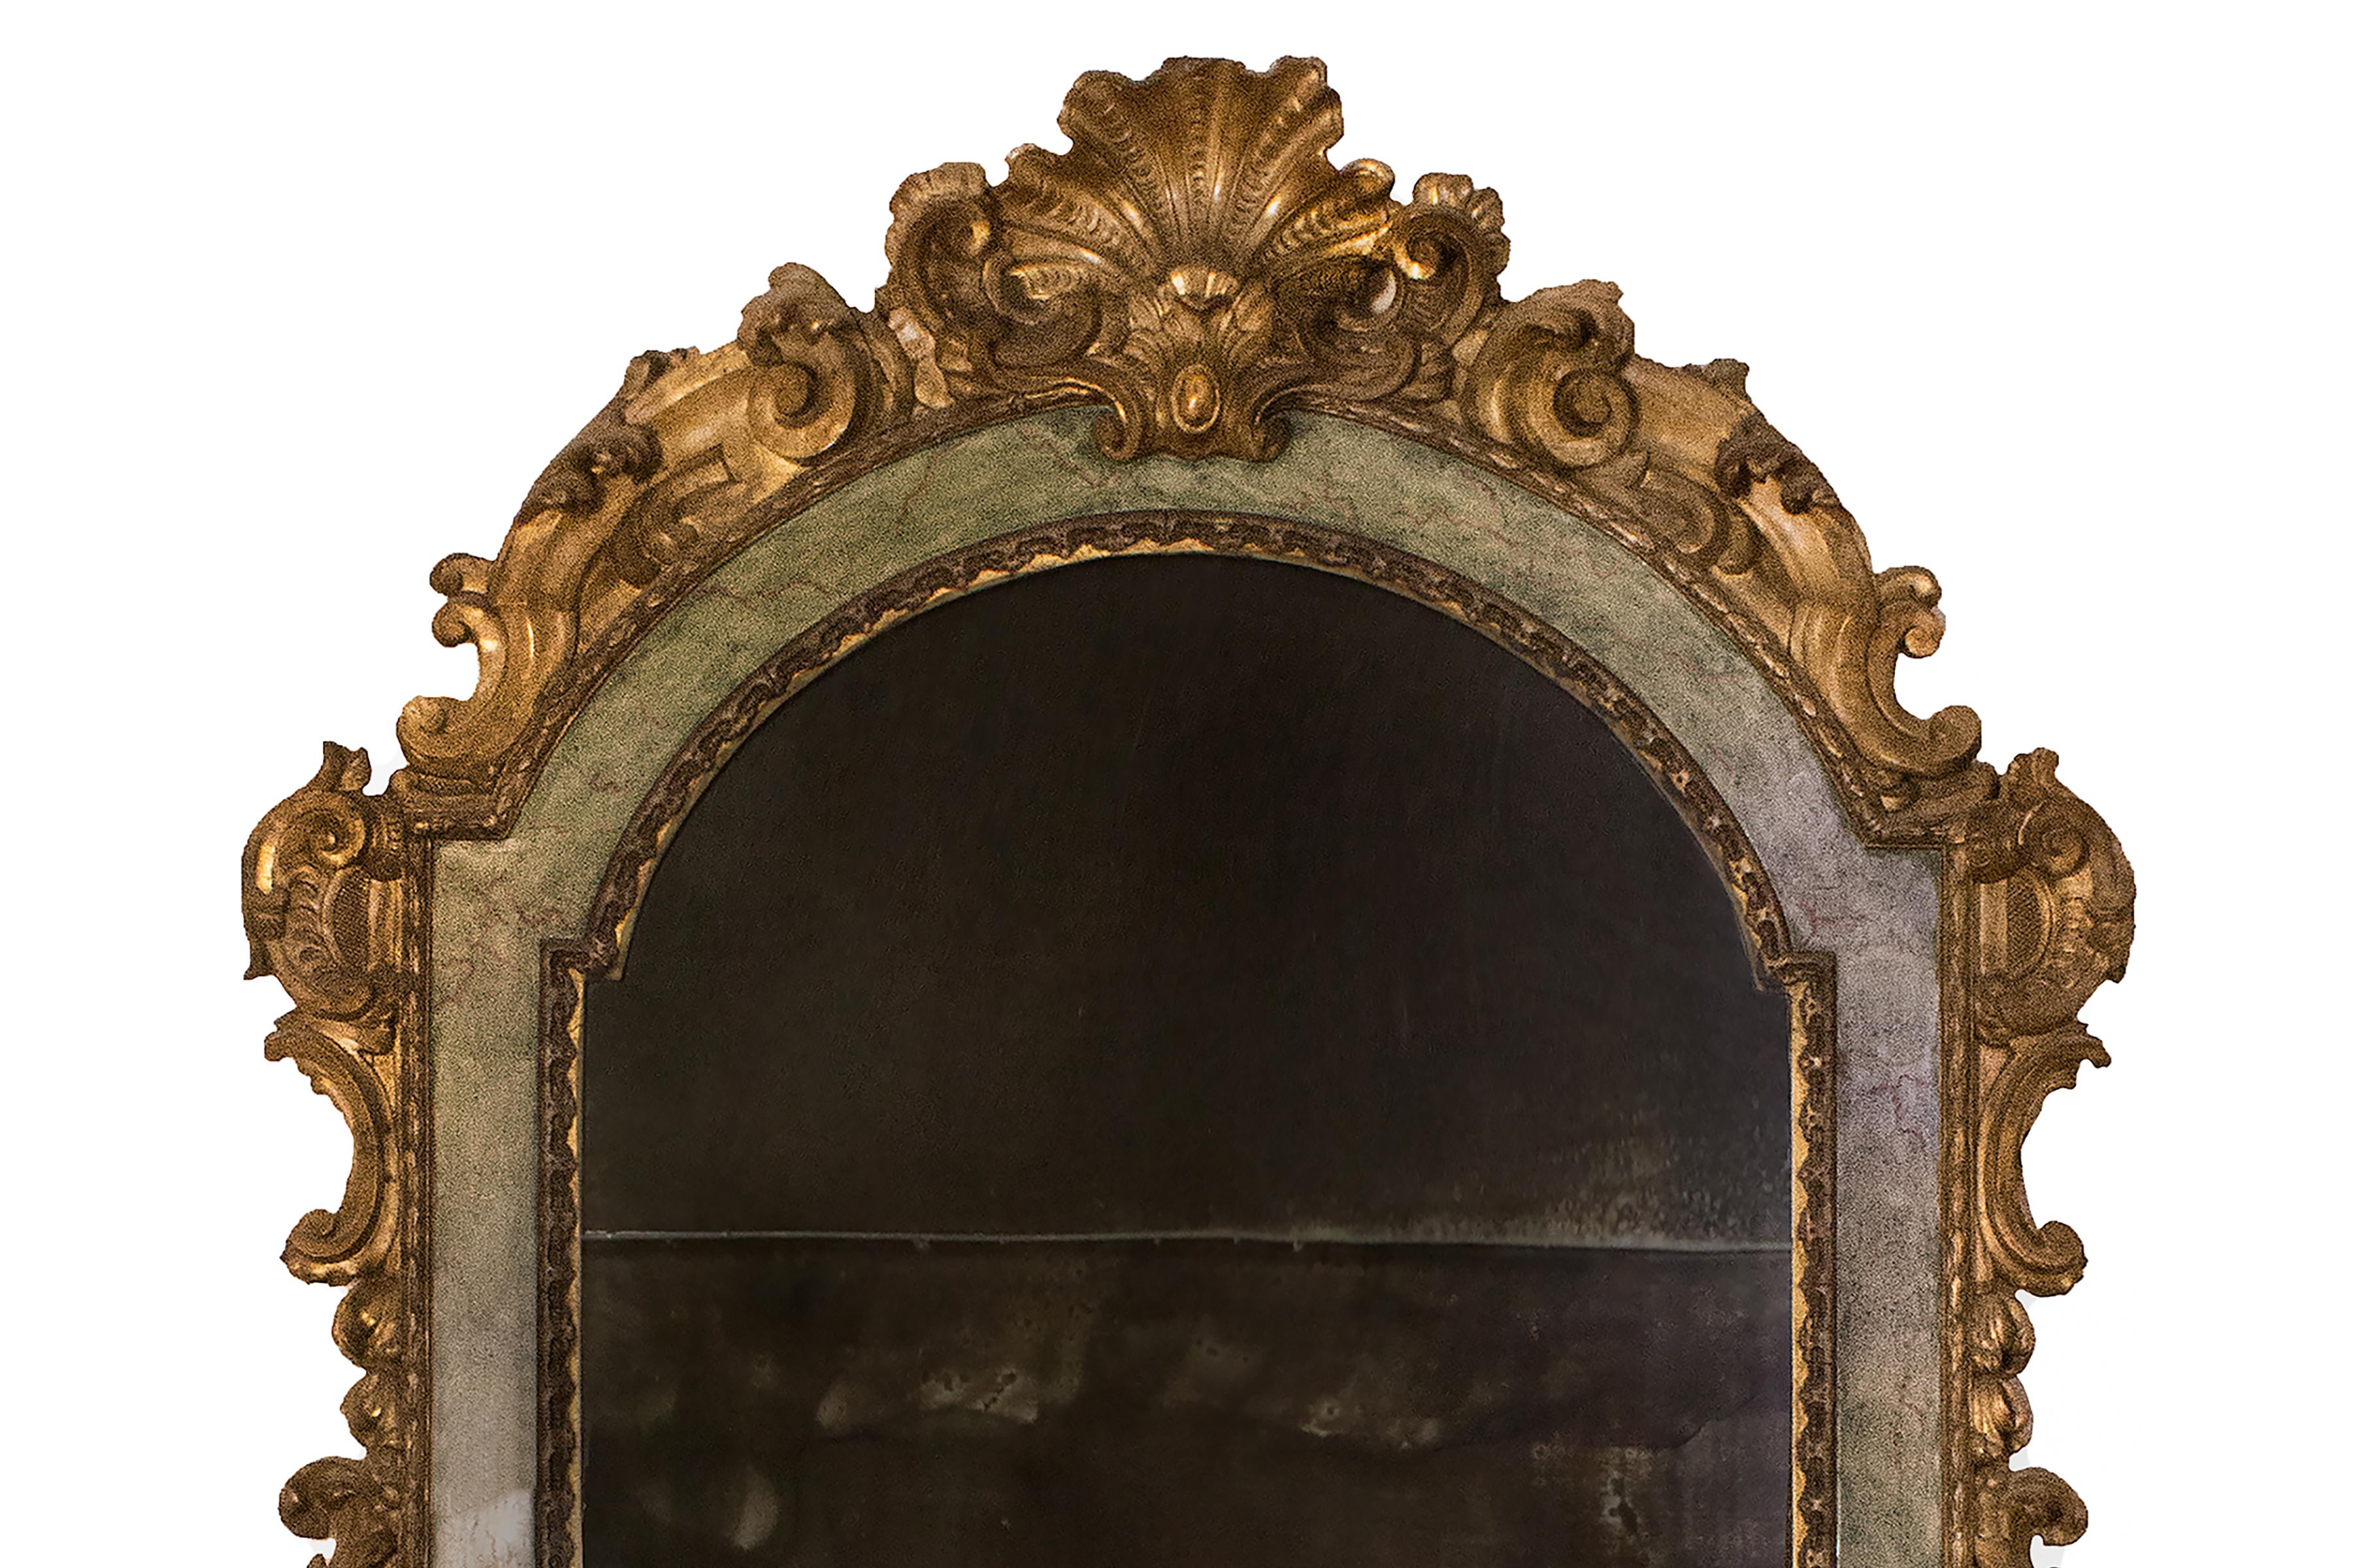 Italian 18th century Rococo archtop painted and gilded mirror. The frame is decorated with gold leaf c-scroll leaves and urns with a shell sculpted and carved molding. It has marbleized painted inlay with muted colors of blue, green, and gray with